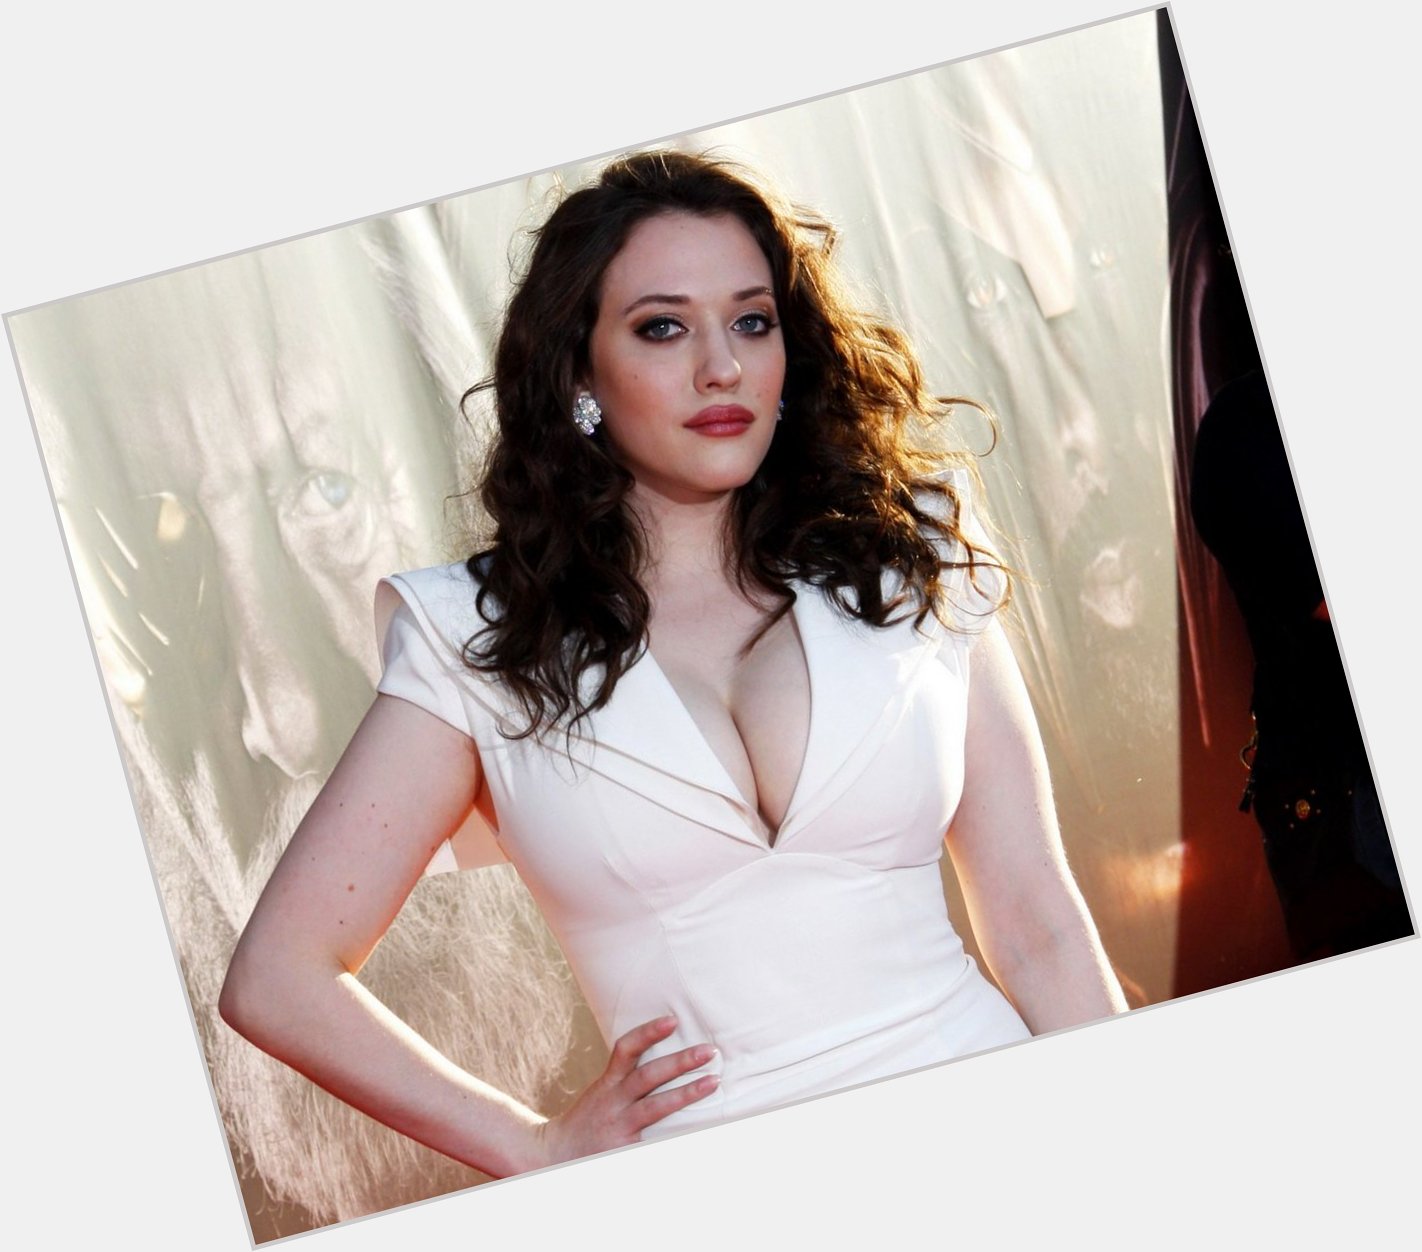 Happy Birthday to Kat Dennings who turns 31 today! 